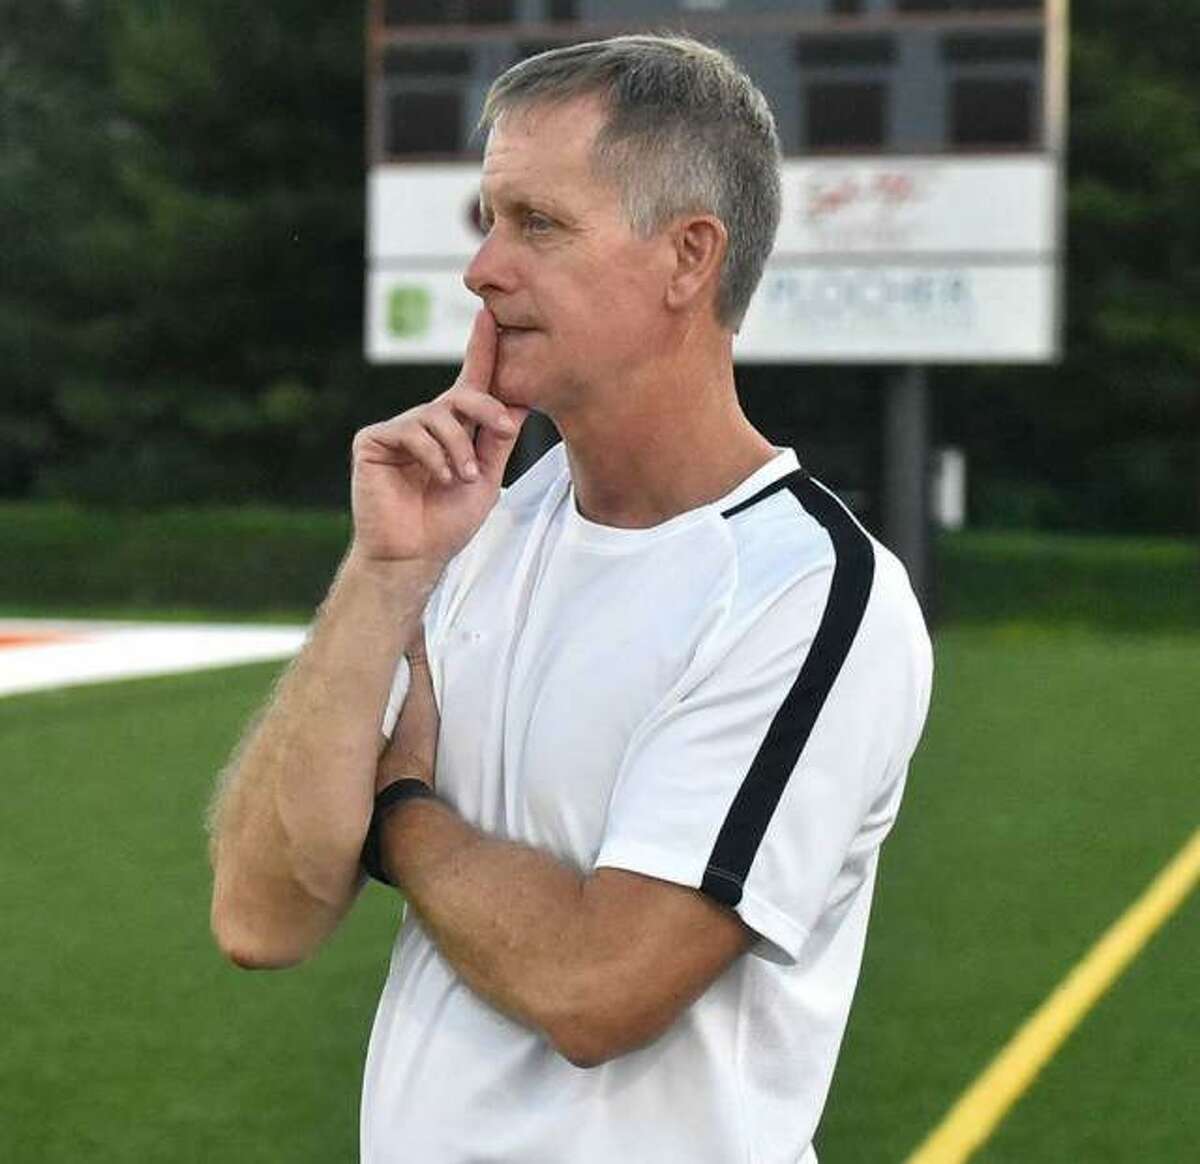 Edwardsville boys soccer coach Mark Heiderscheid was one of six coaches selected for the High School All-American Game on May 29, 2021, in St. Louis.